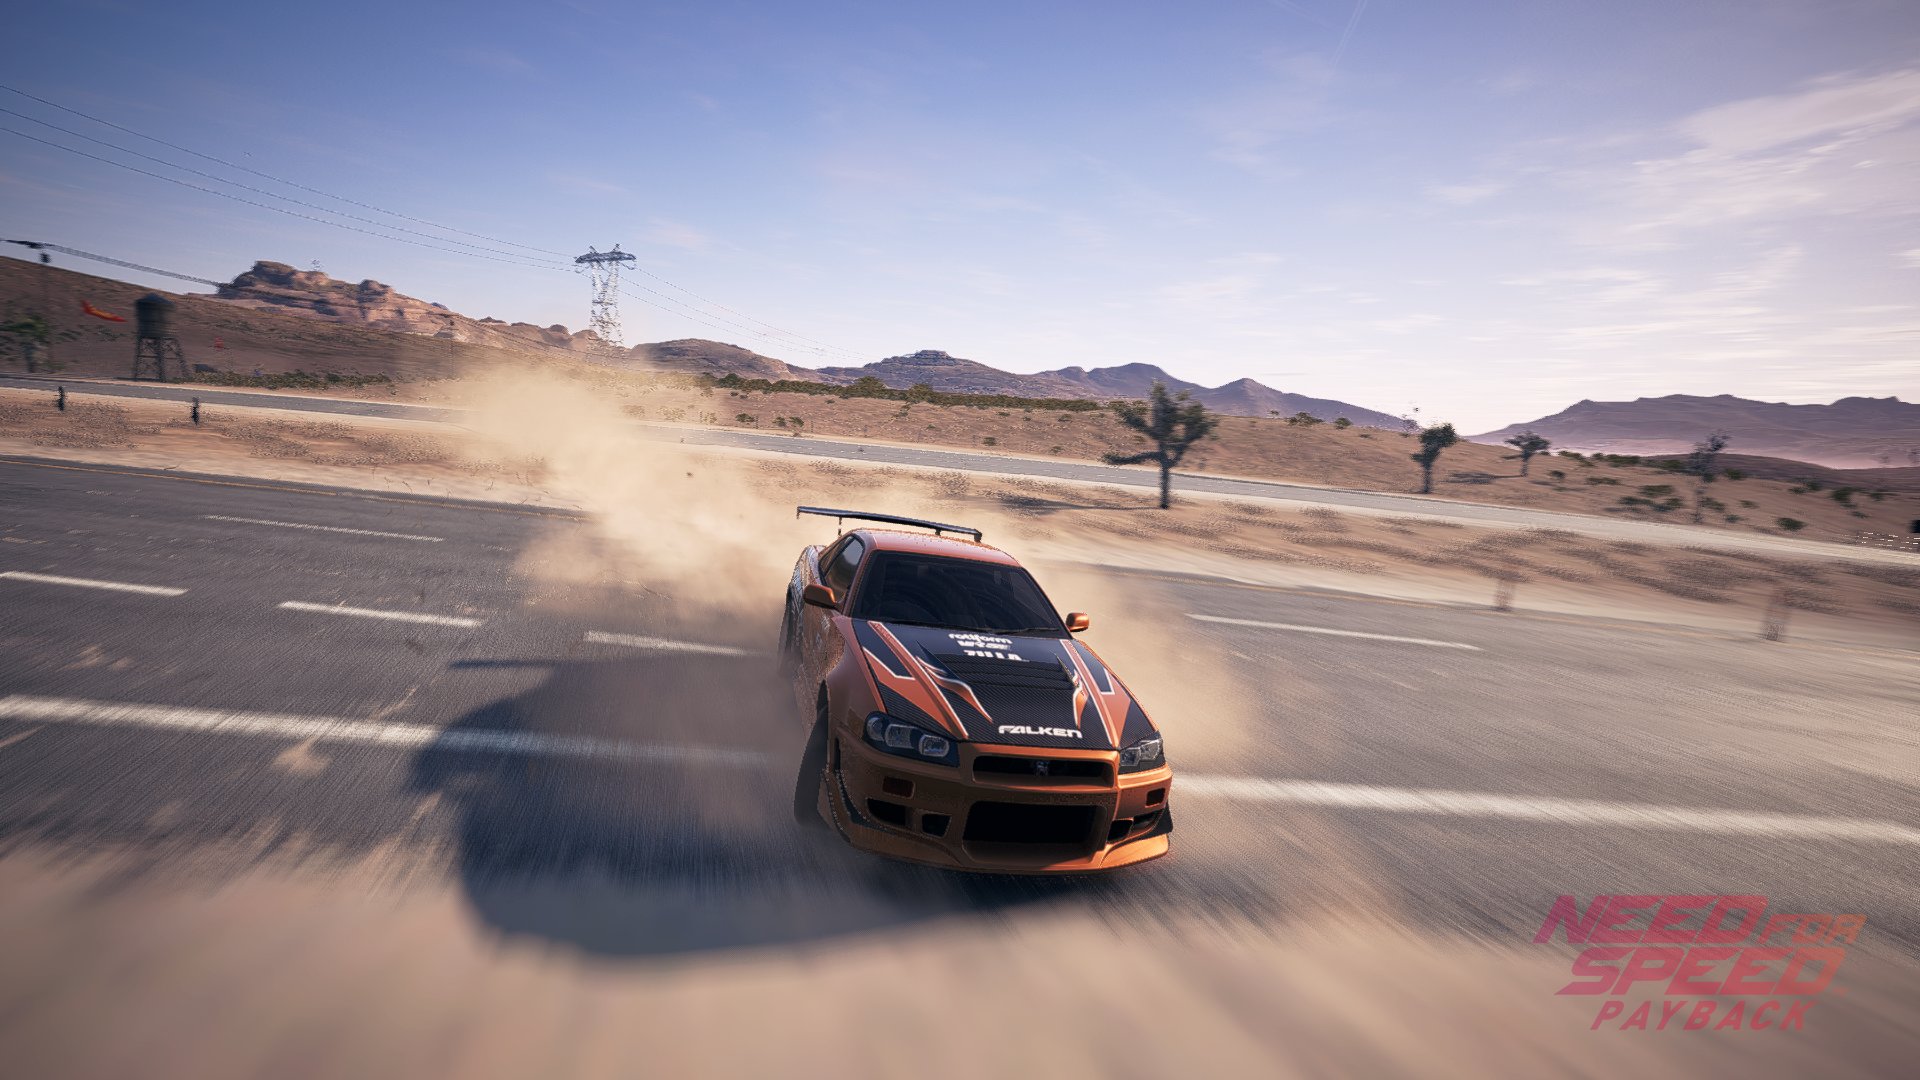 nfs payback abandoned car march 2018